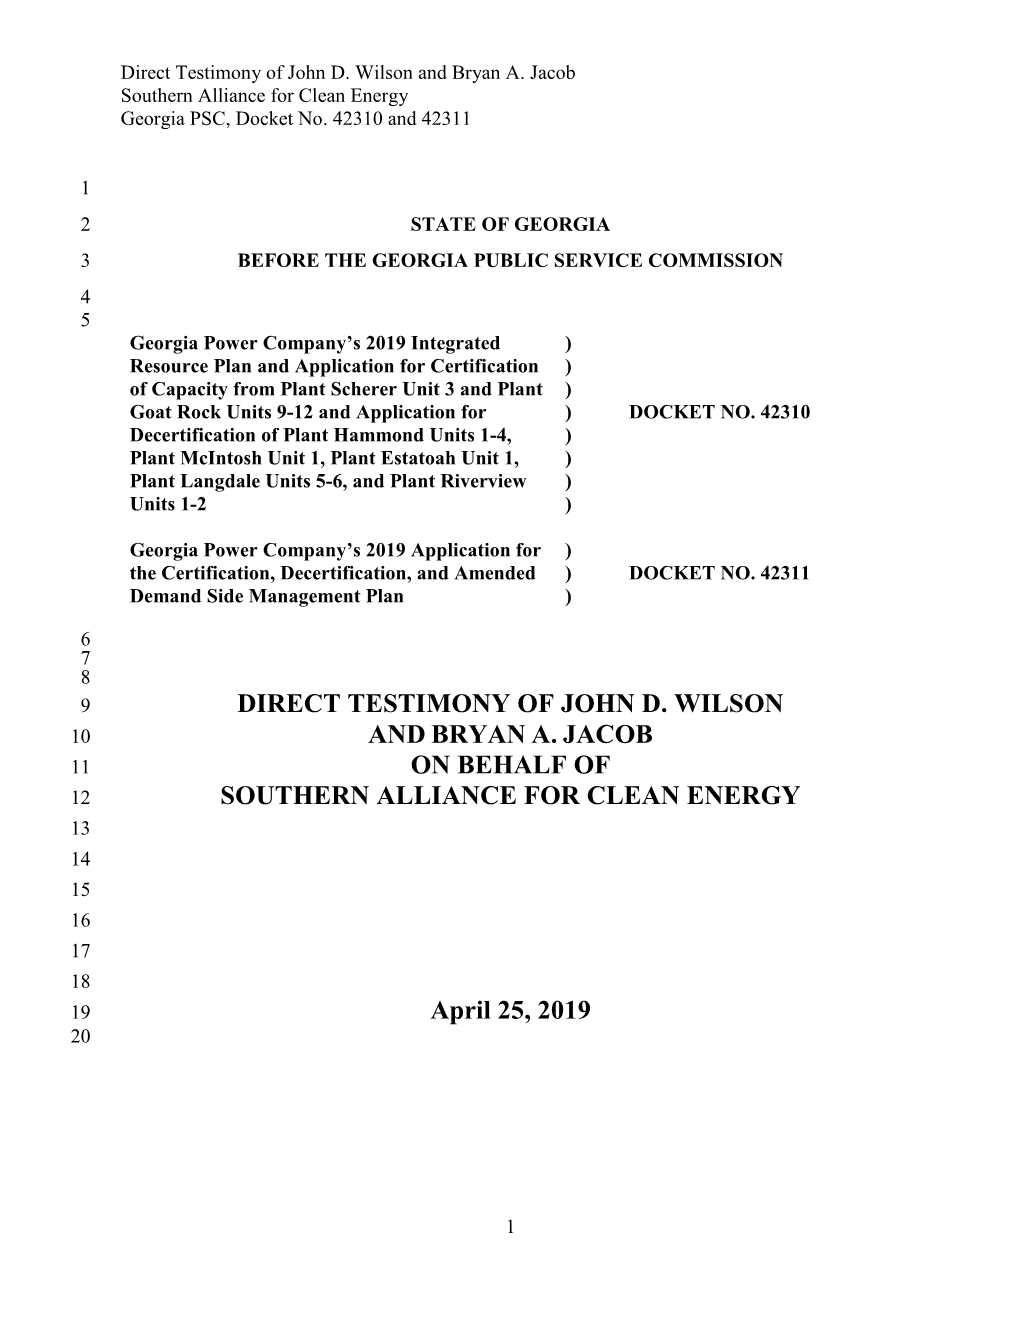 Direct Testimony of John D. Wilson and Bryan A. Jacob Southern Alliance for Clean Energy Georgia PSC, Docket No